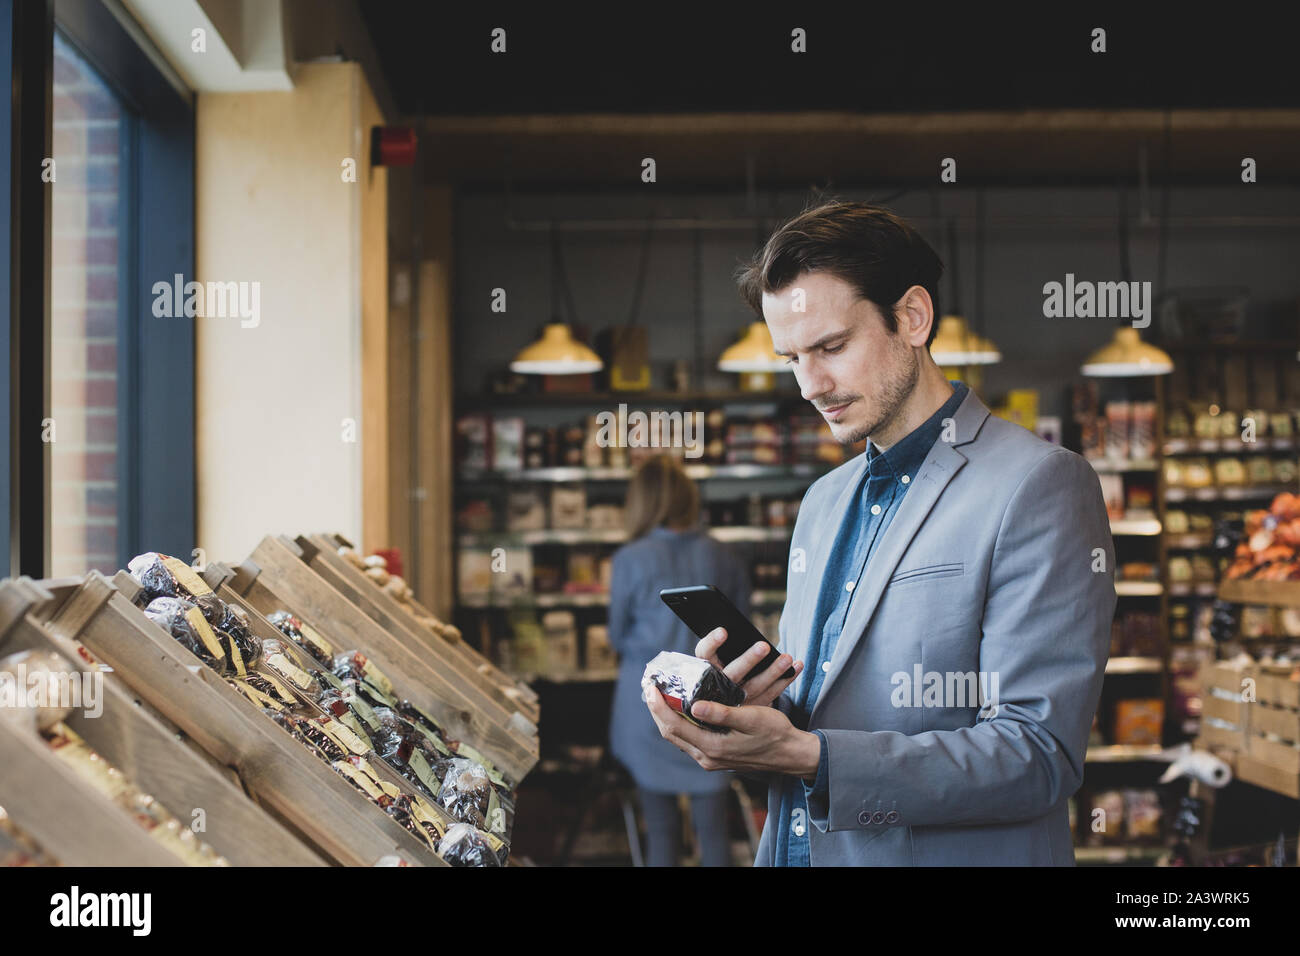 Adult male using self scan in a grocery store Stock Photo